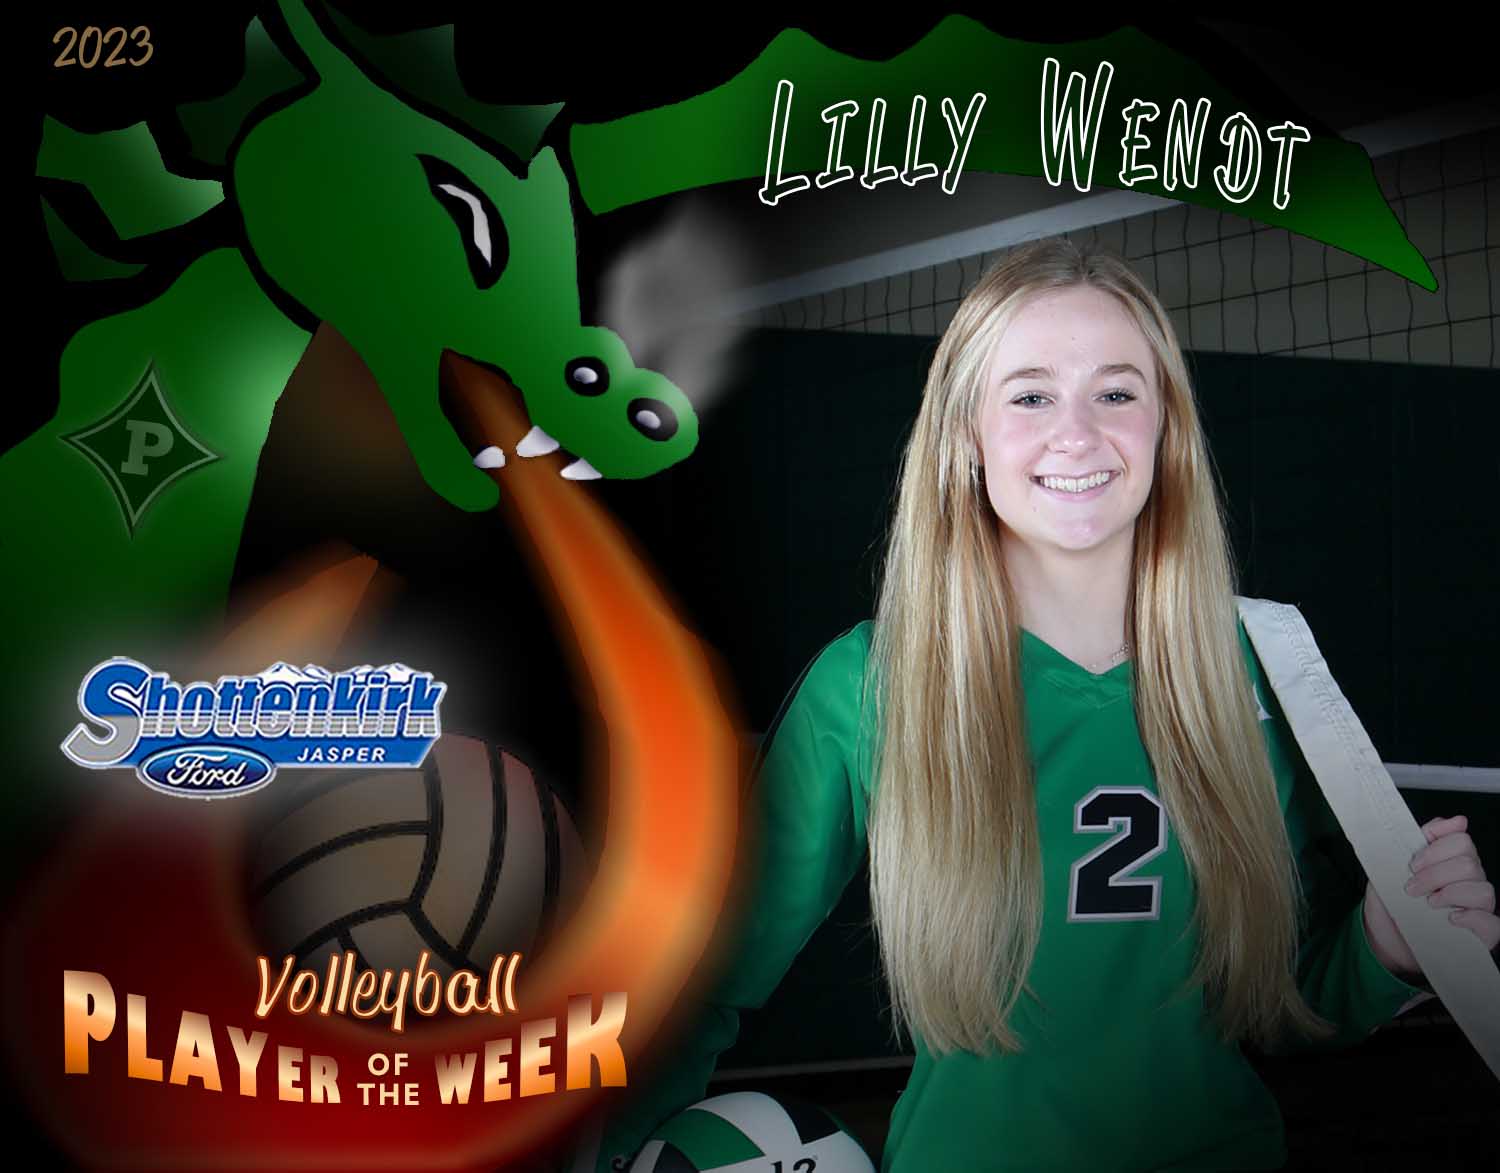 PHS Volleyball Player of the Week #1 - Lilly Wendt